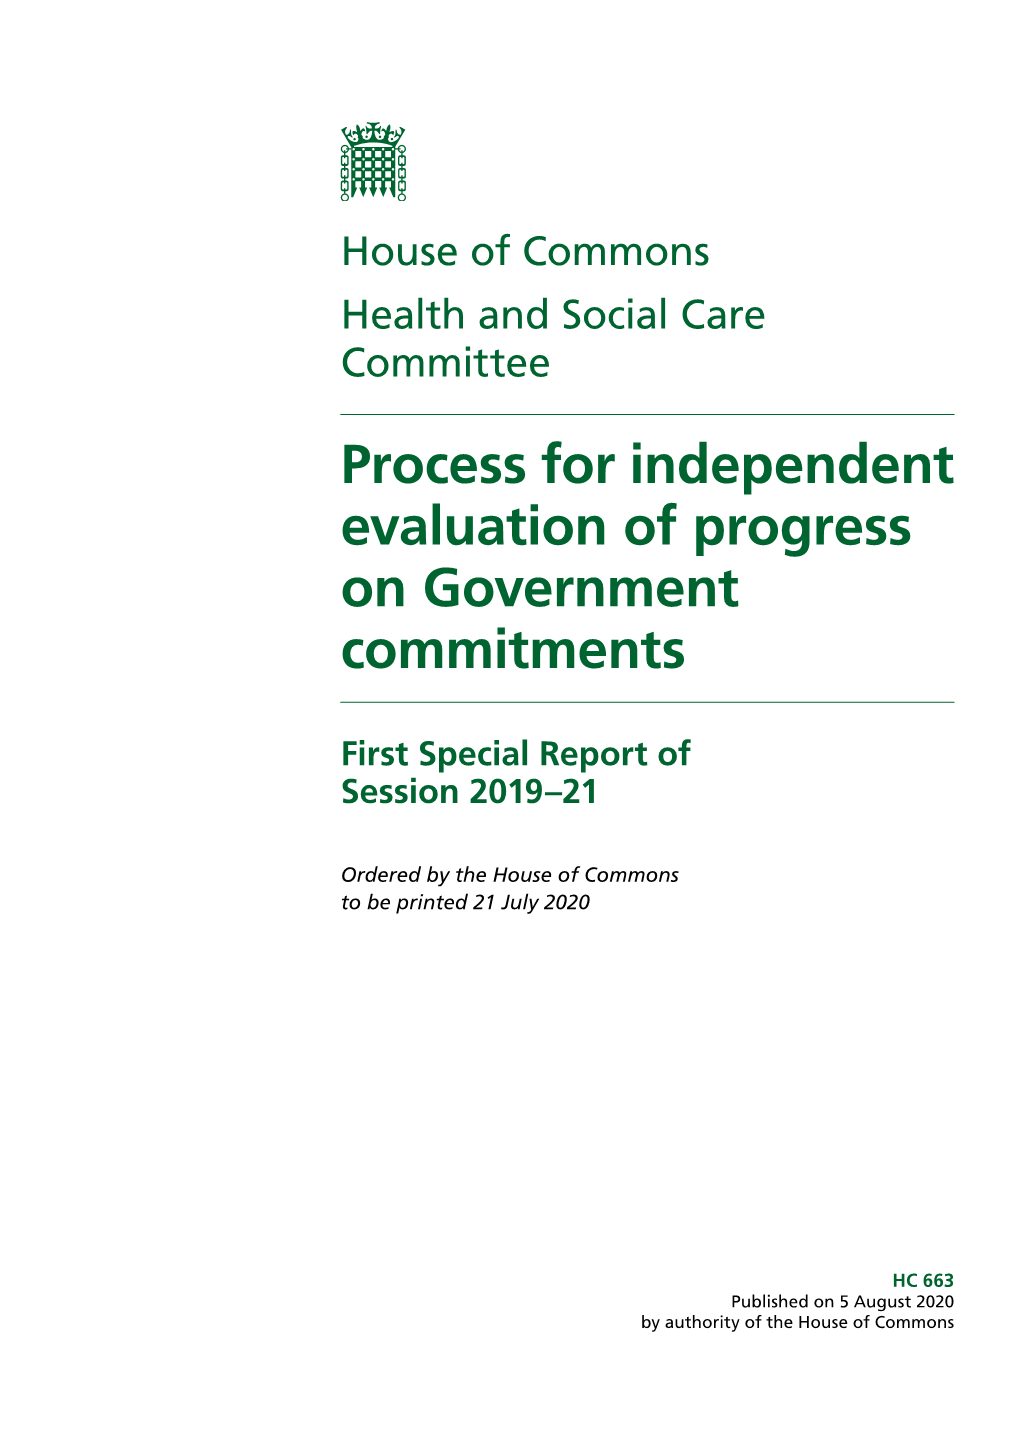 Process for Independent Evaluation of Progress on Government Commitments